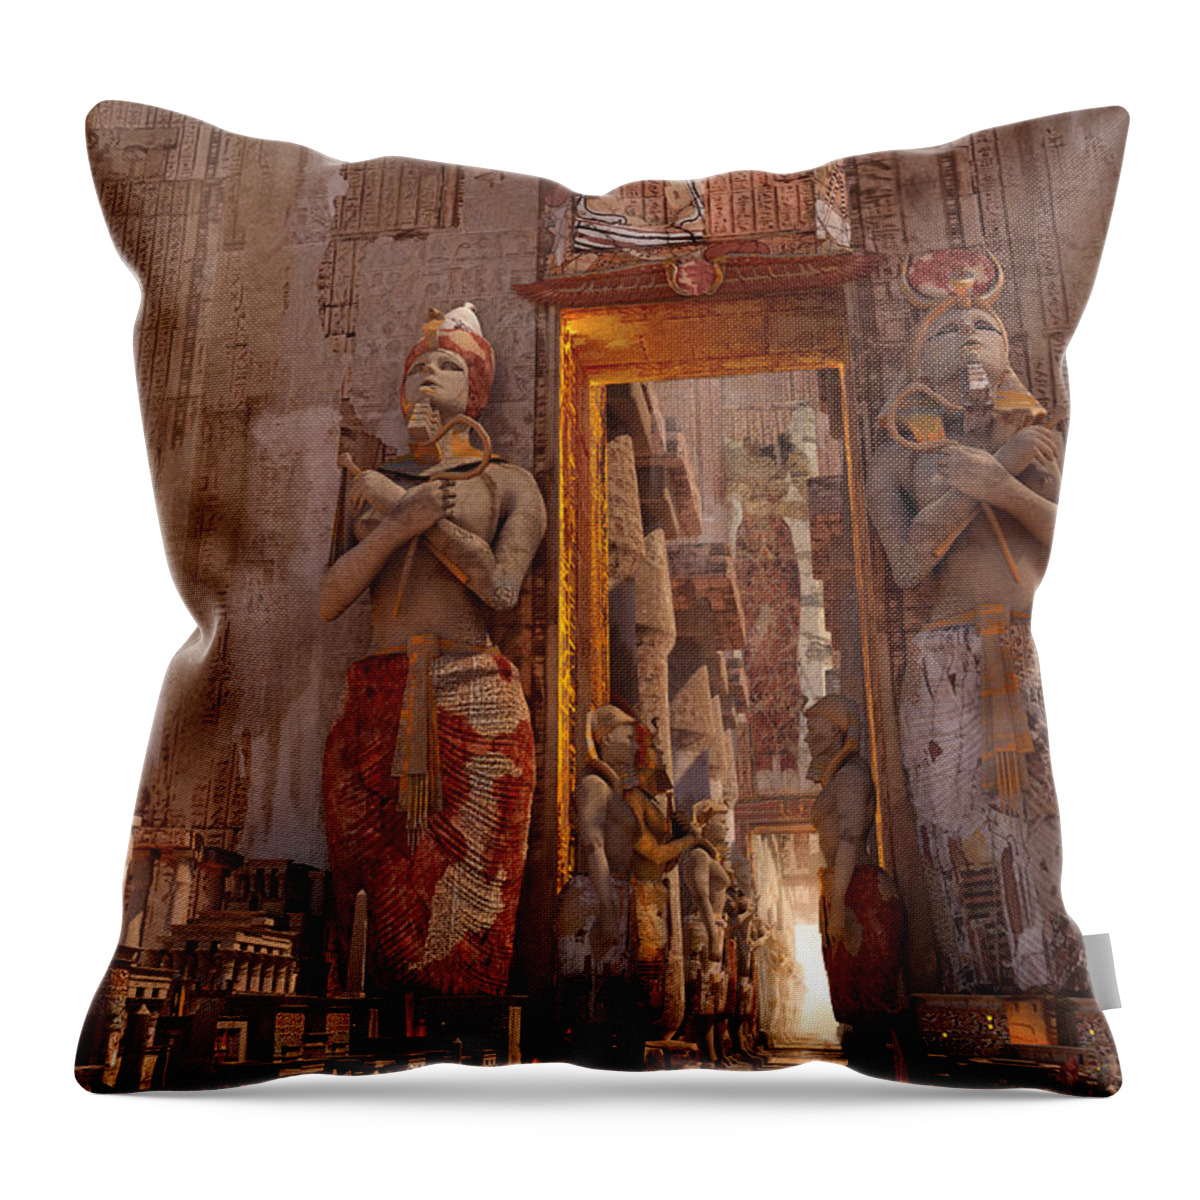 Landscape Throw Pillow featuring the digital art Wonders Door To The Luxor by Te Hu